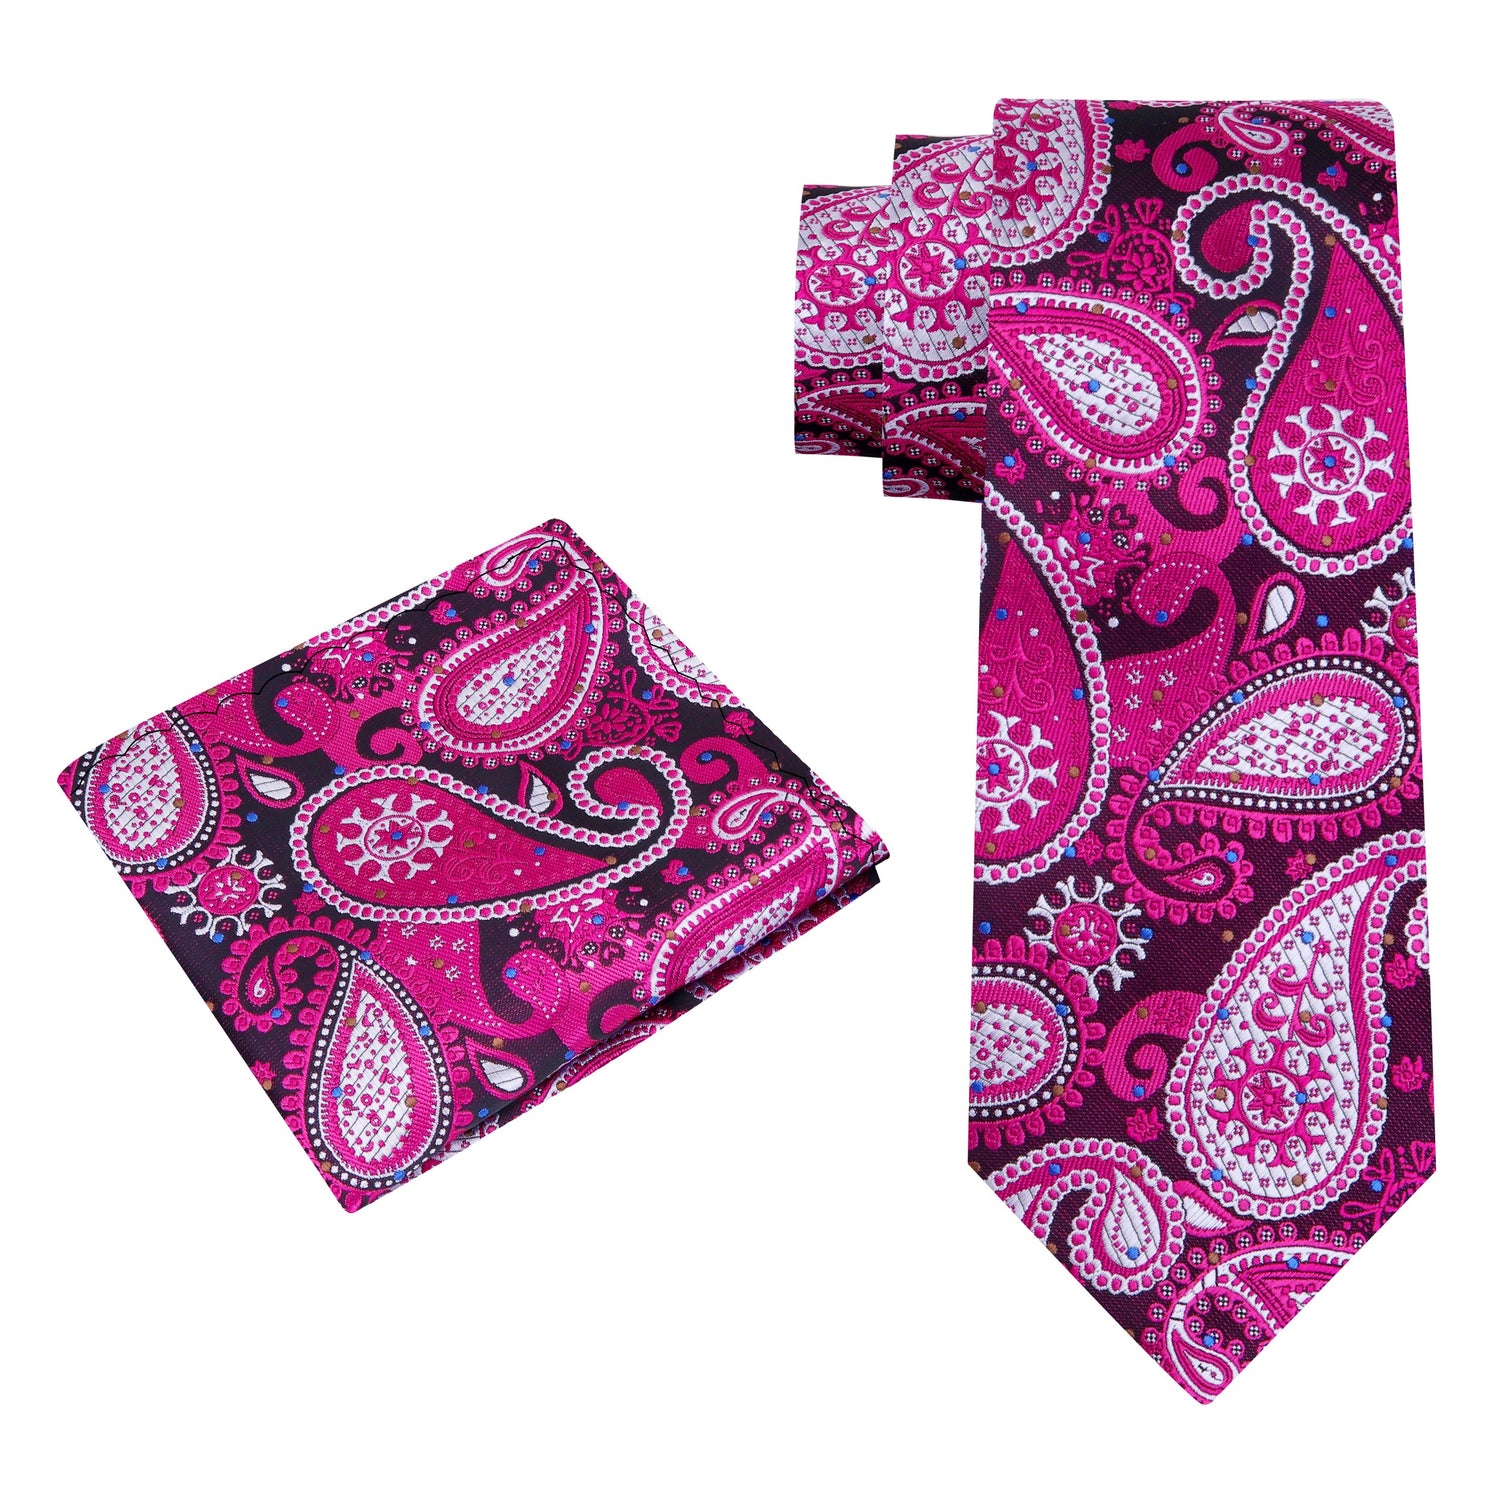 Alt View: Pink Paisley Tie and Pocket Square